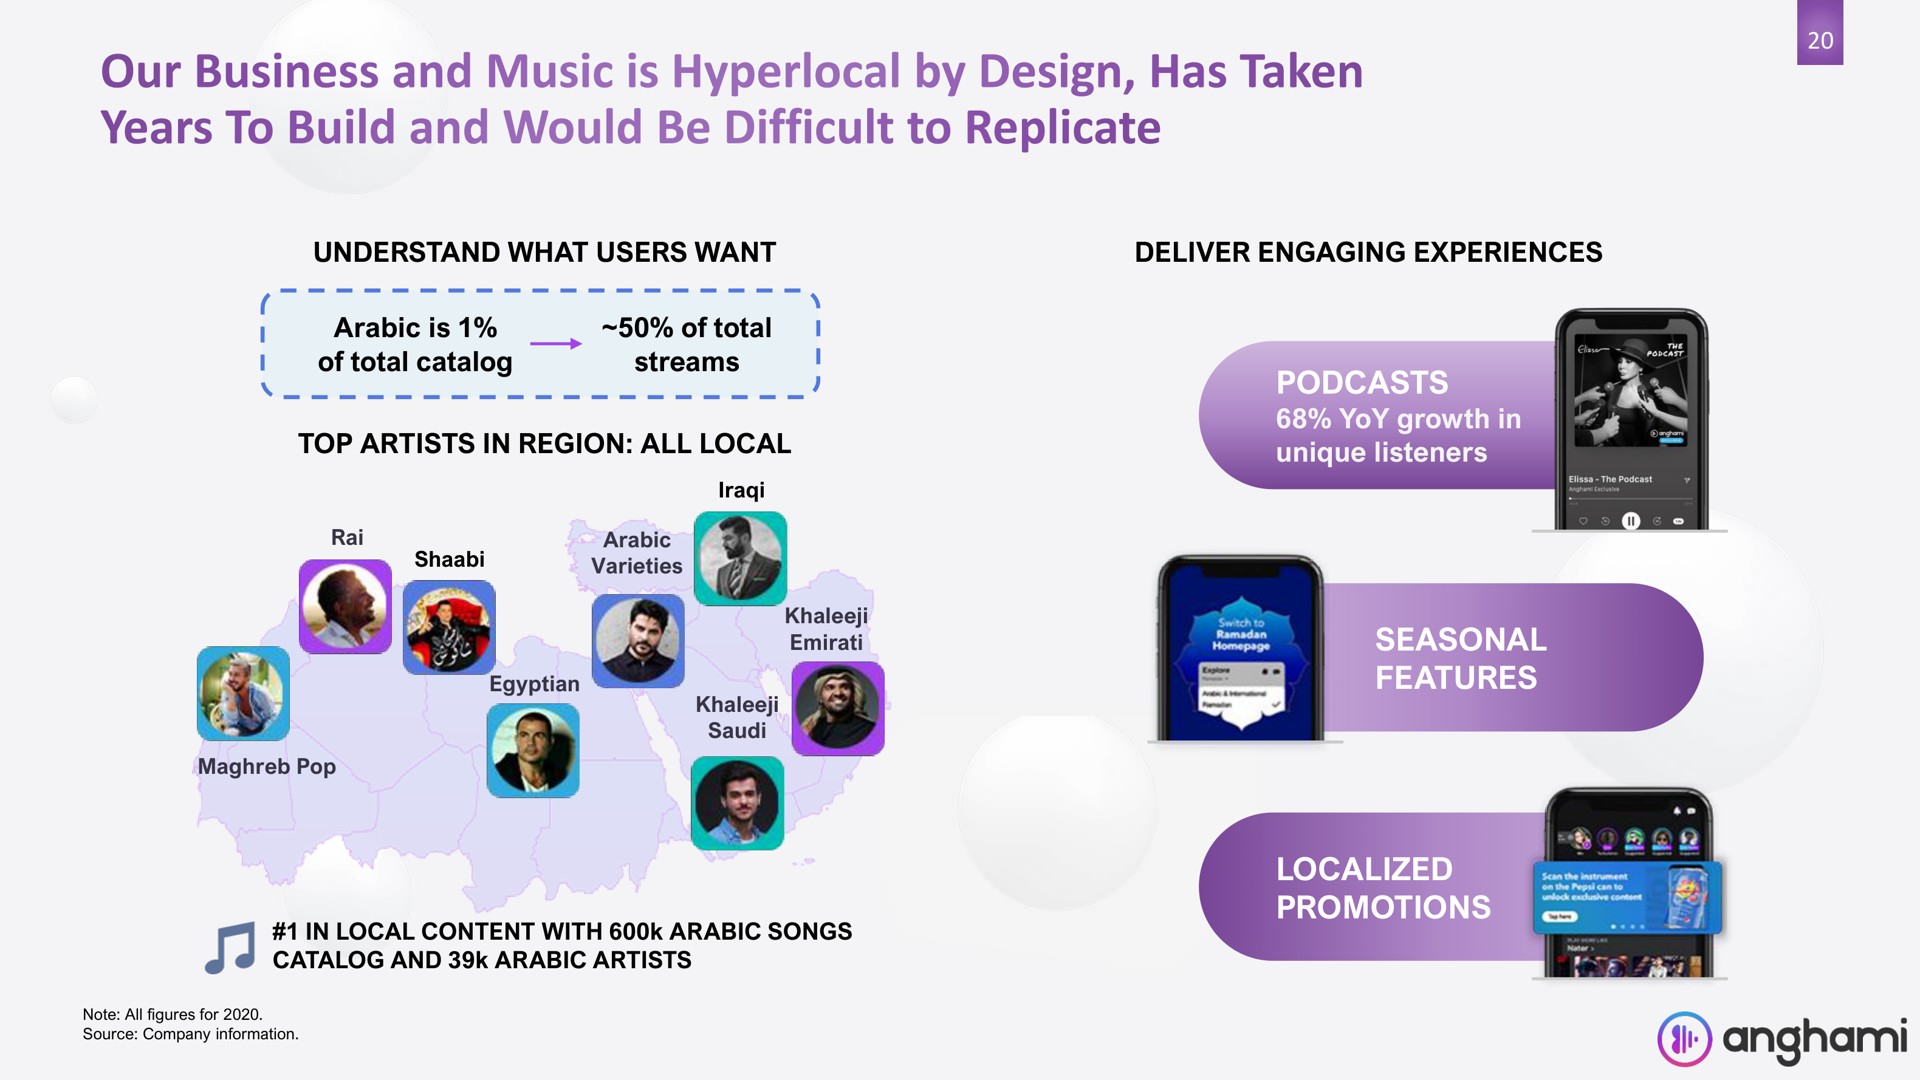 our business and music is by design has taken years to build and would be difficult to replicate a promotions | Anghami